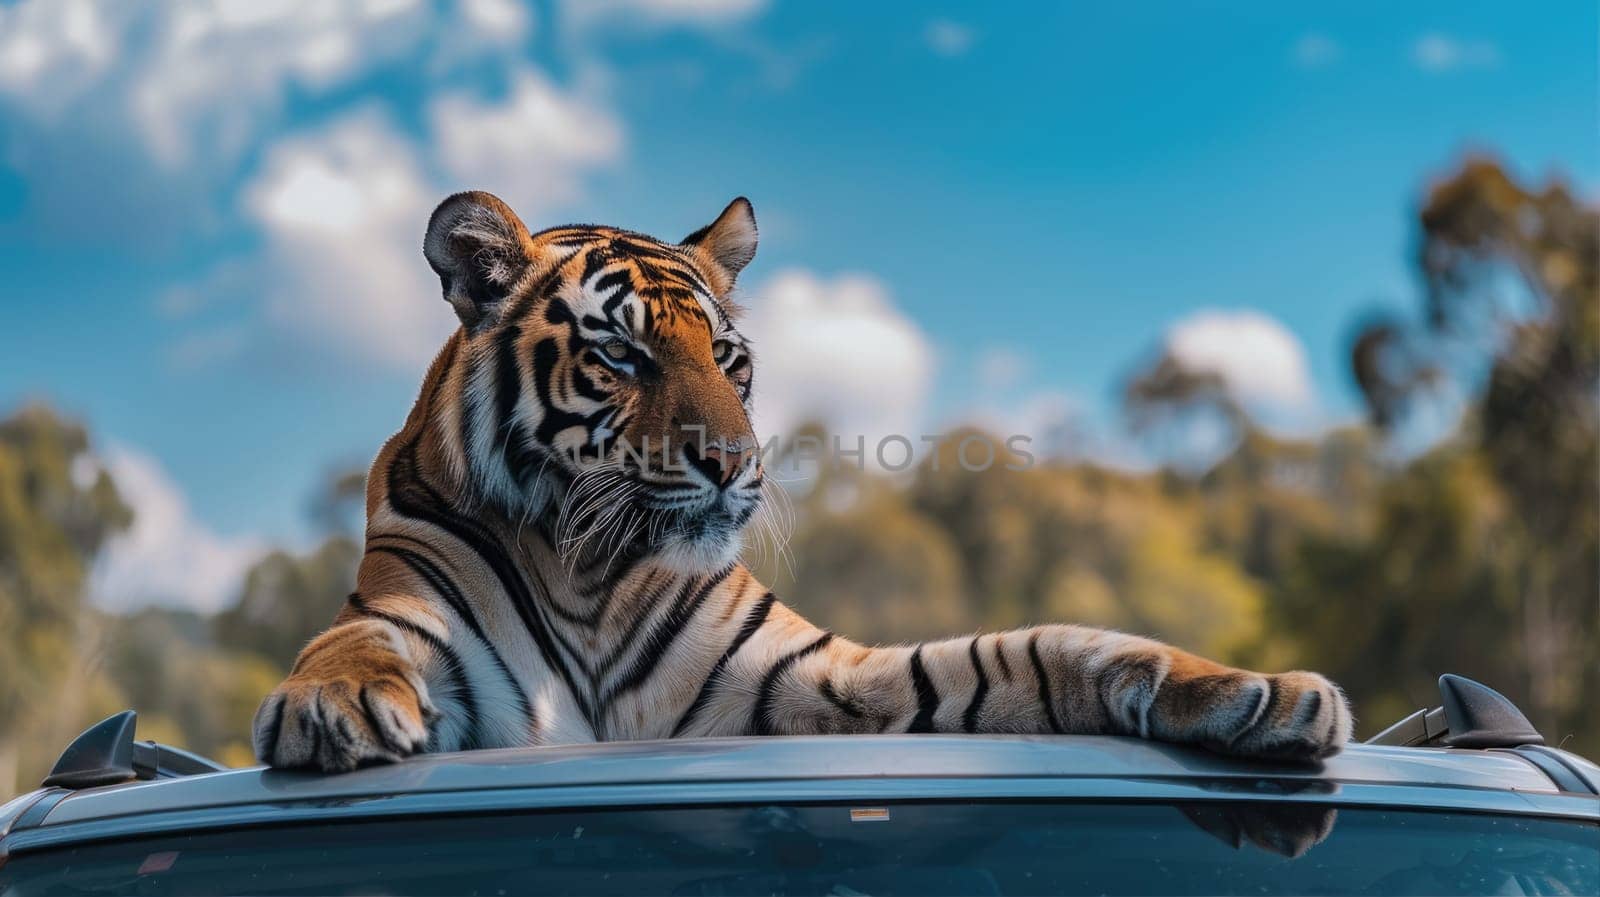 Tiger sitting on the roof of a car by natali_brill